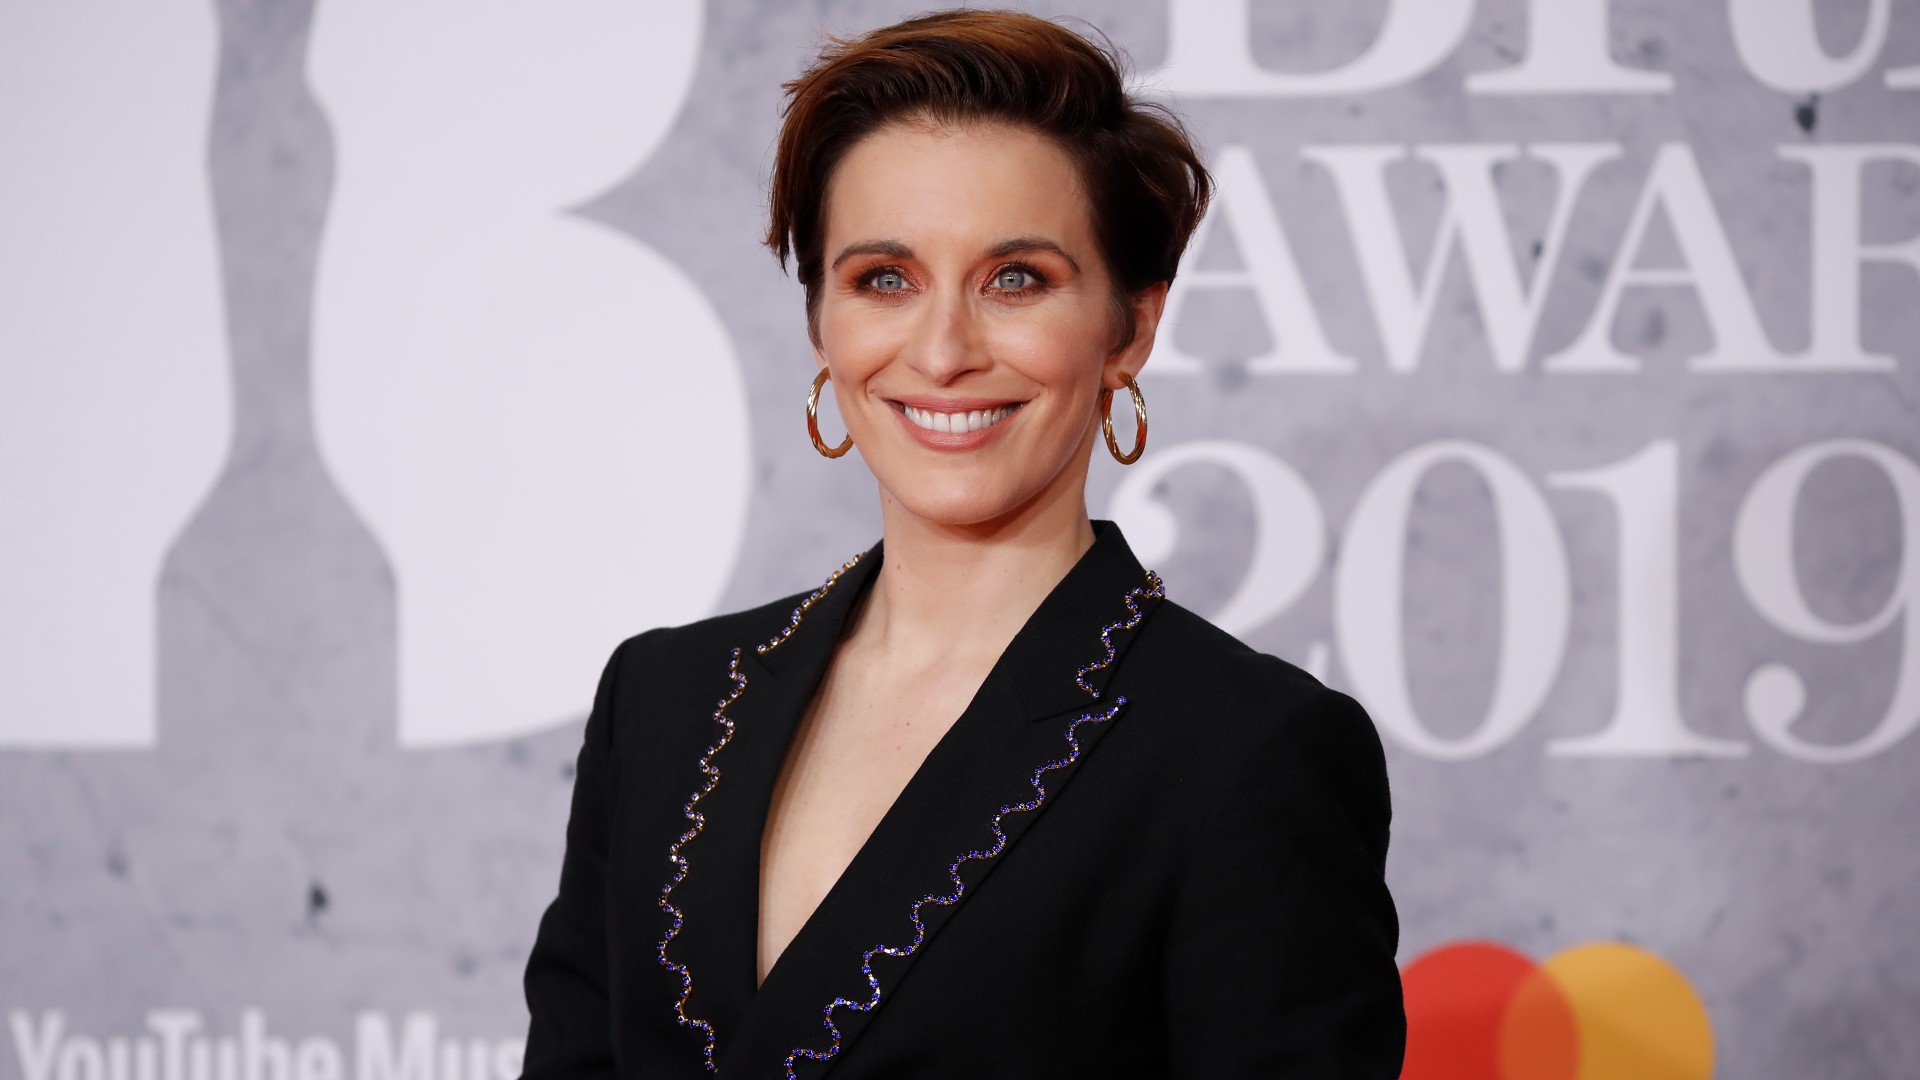 10 Things You May Not Know About 'Line of Duty' Actress Vicky McClure